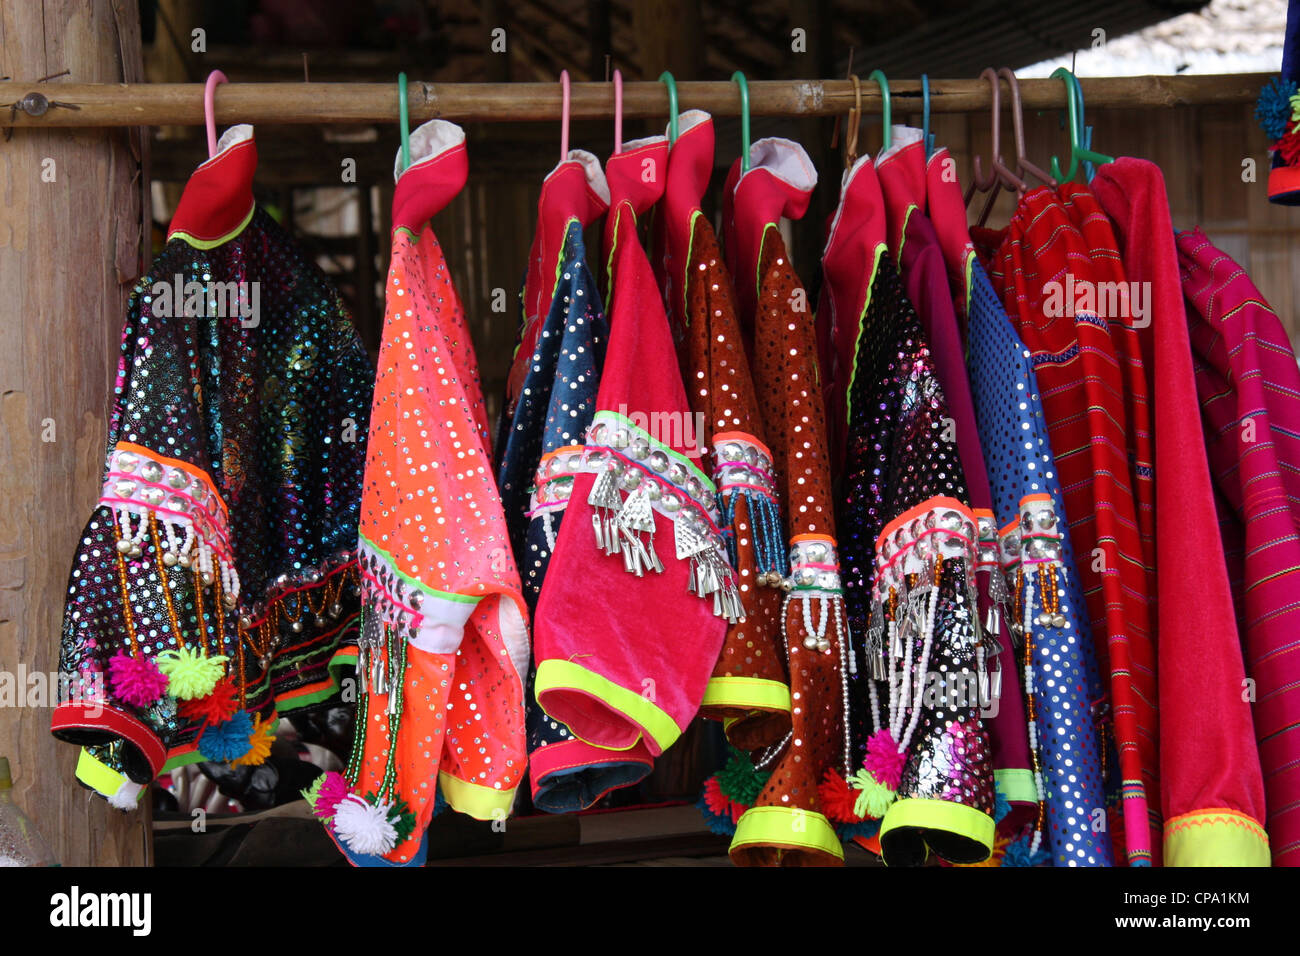 Colorful clothing made by Hill Tribe people in Chiang Mai, Thailand Stock Photo